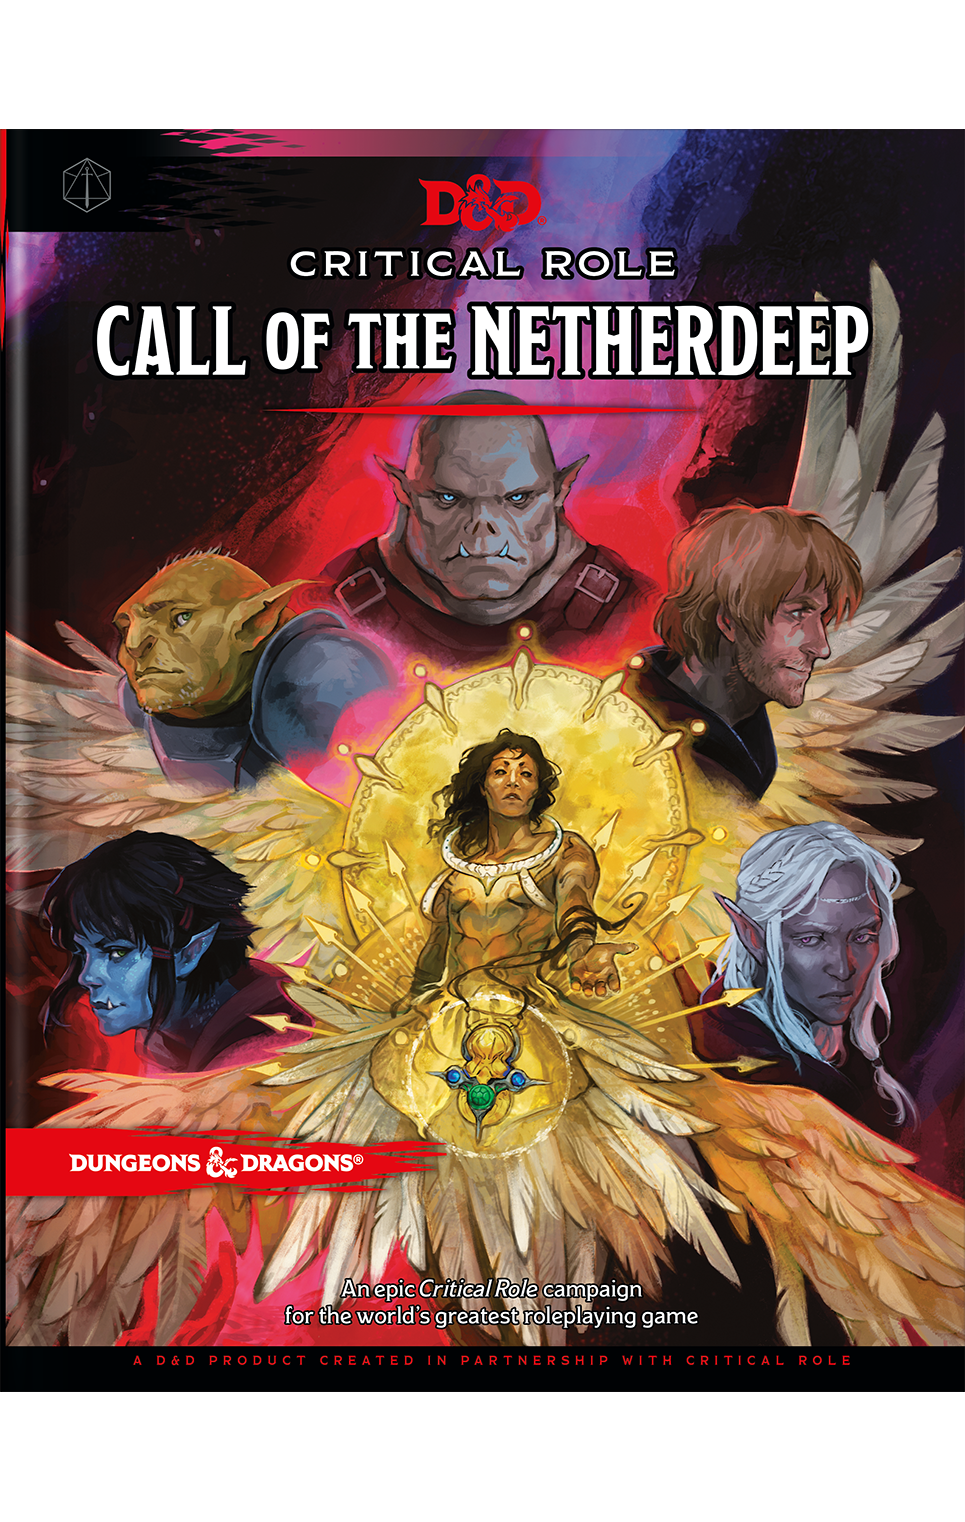 DUNGEONS & DRAGONS 5A EDIZIONE - CALL OF THE NETHERDEEP